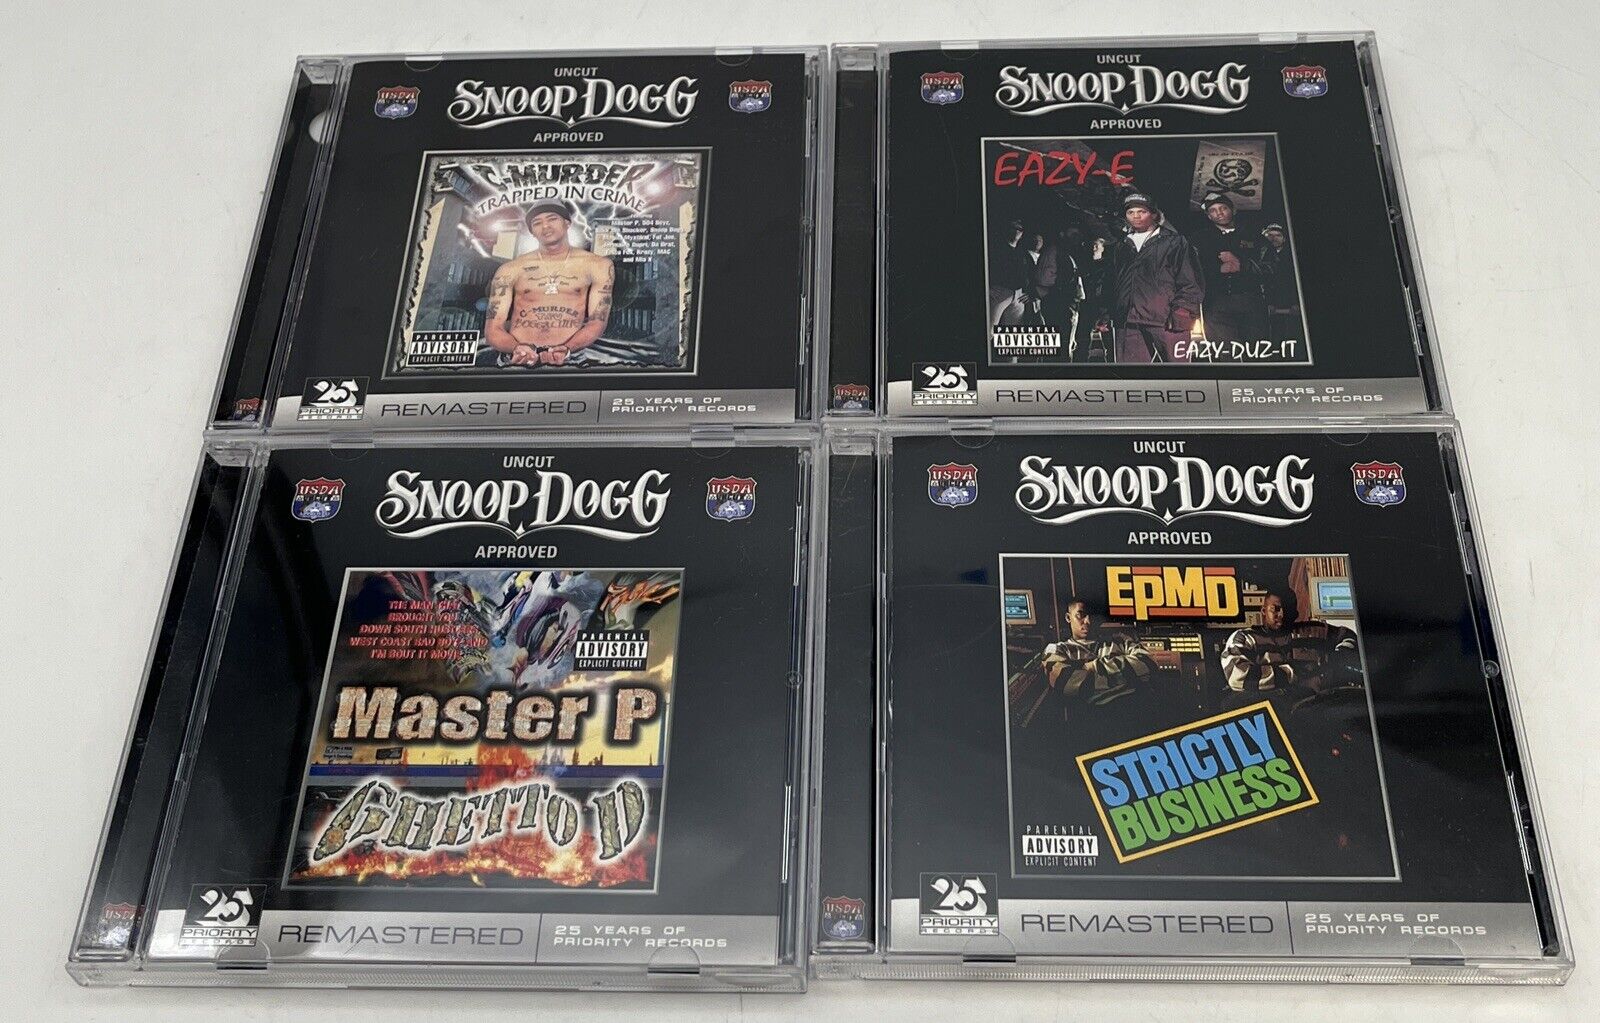 Uncut Snoop Dogg Approved Audio CD Collection Lot Of 4